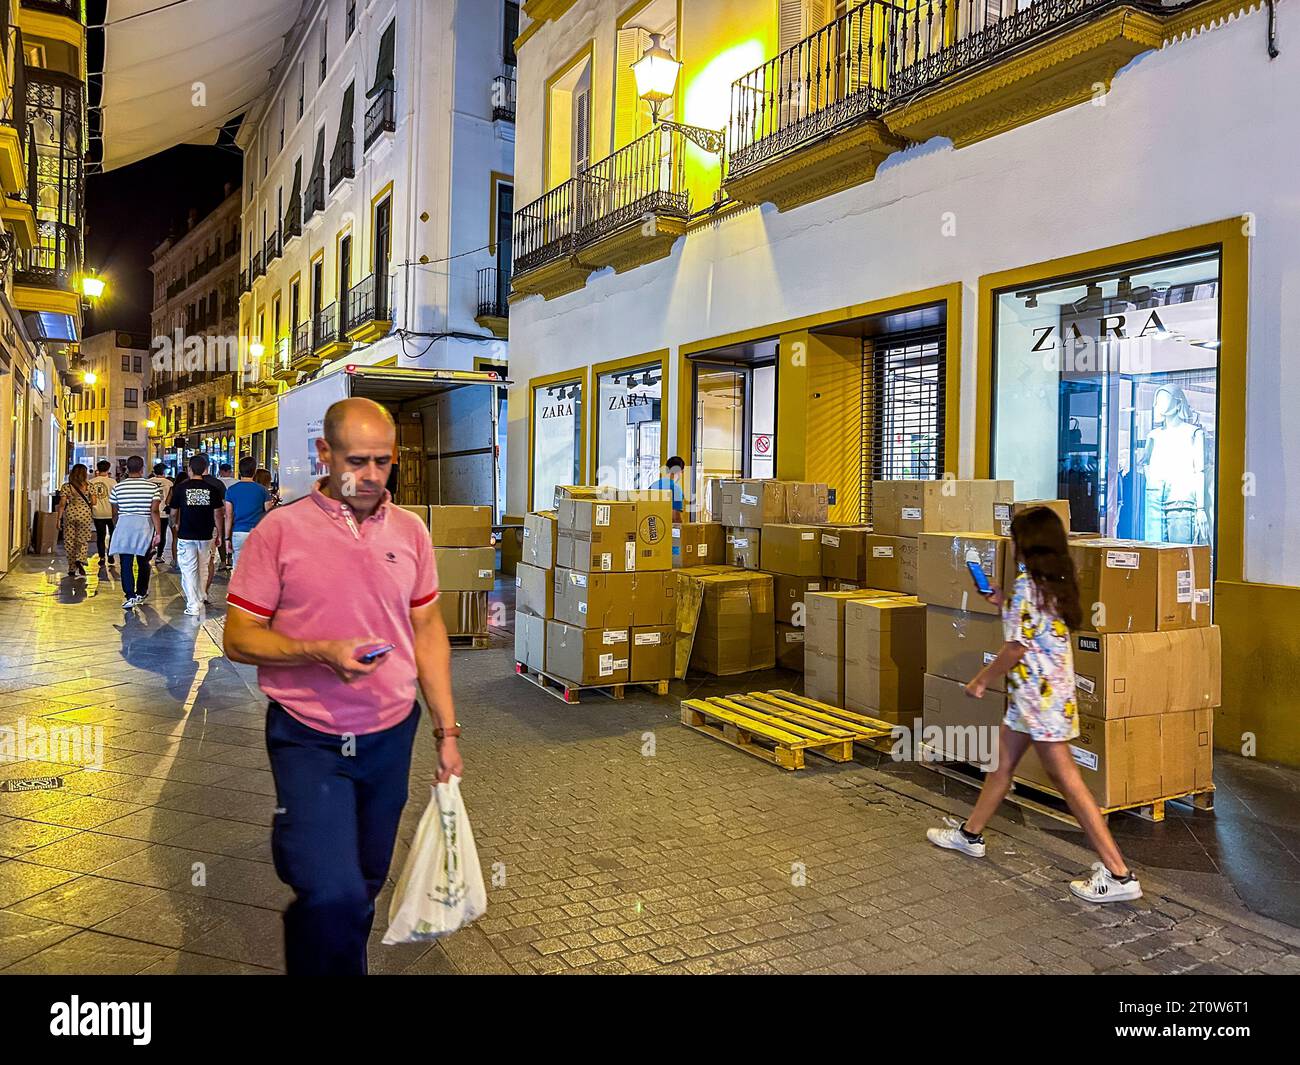 Seville, Spain, Street Scene, Fast Fashion Clothing Industry, UnLoading Boxes at Night, Zara Company, Man WaLking in Front looking at Smart Phone Stock Photo